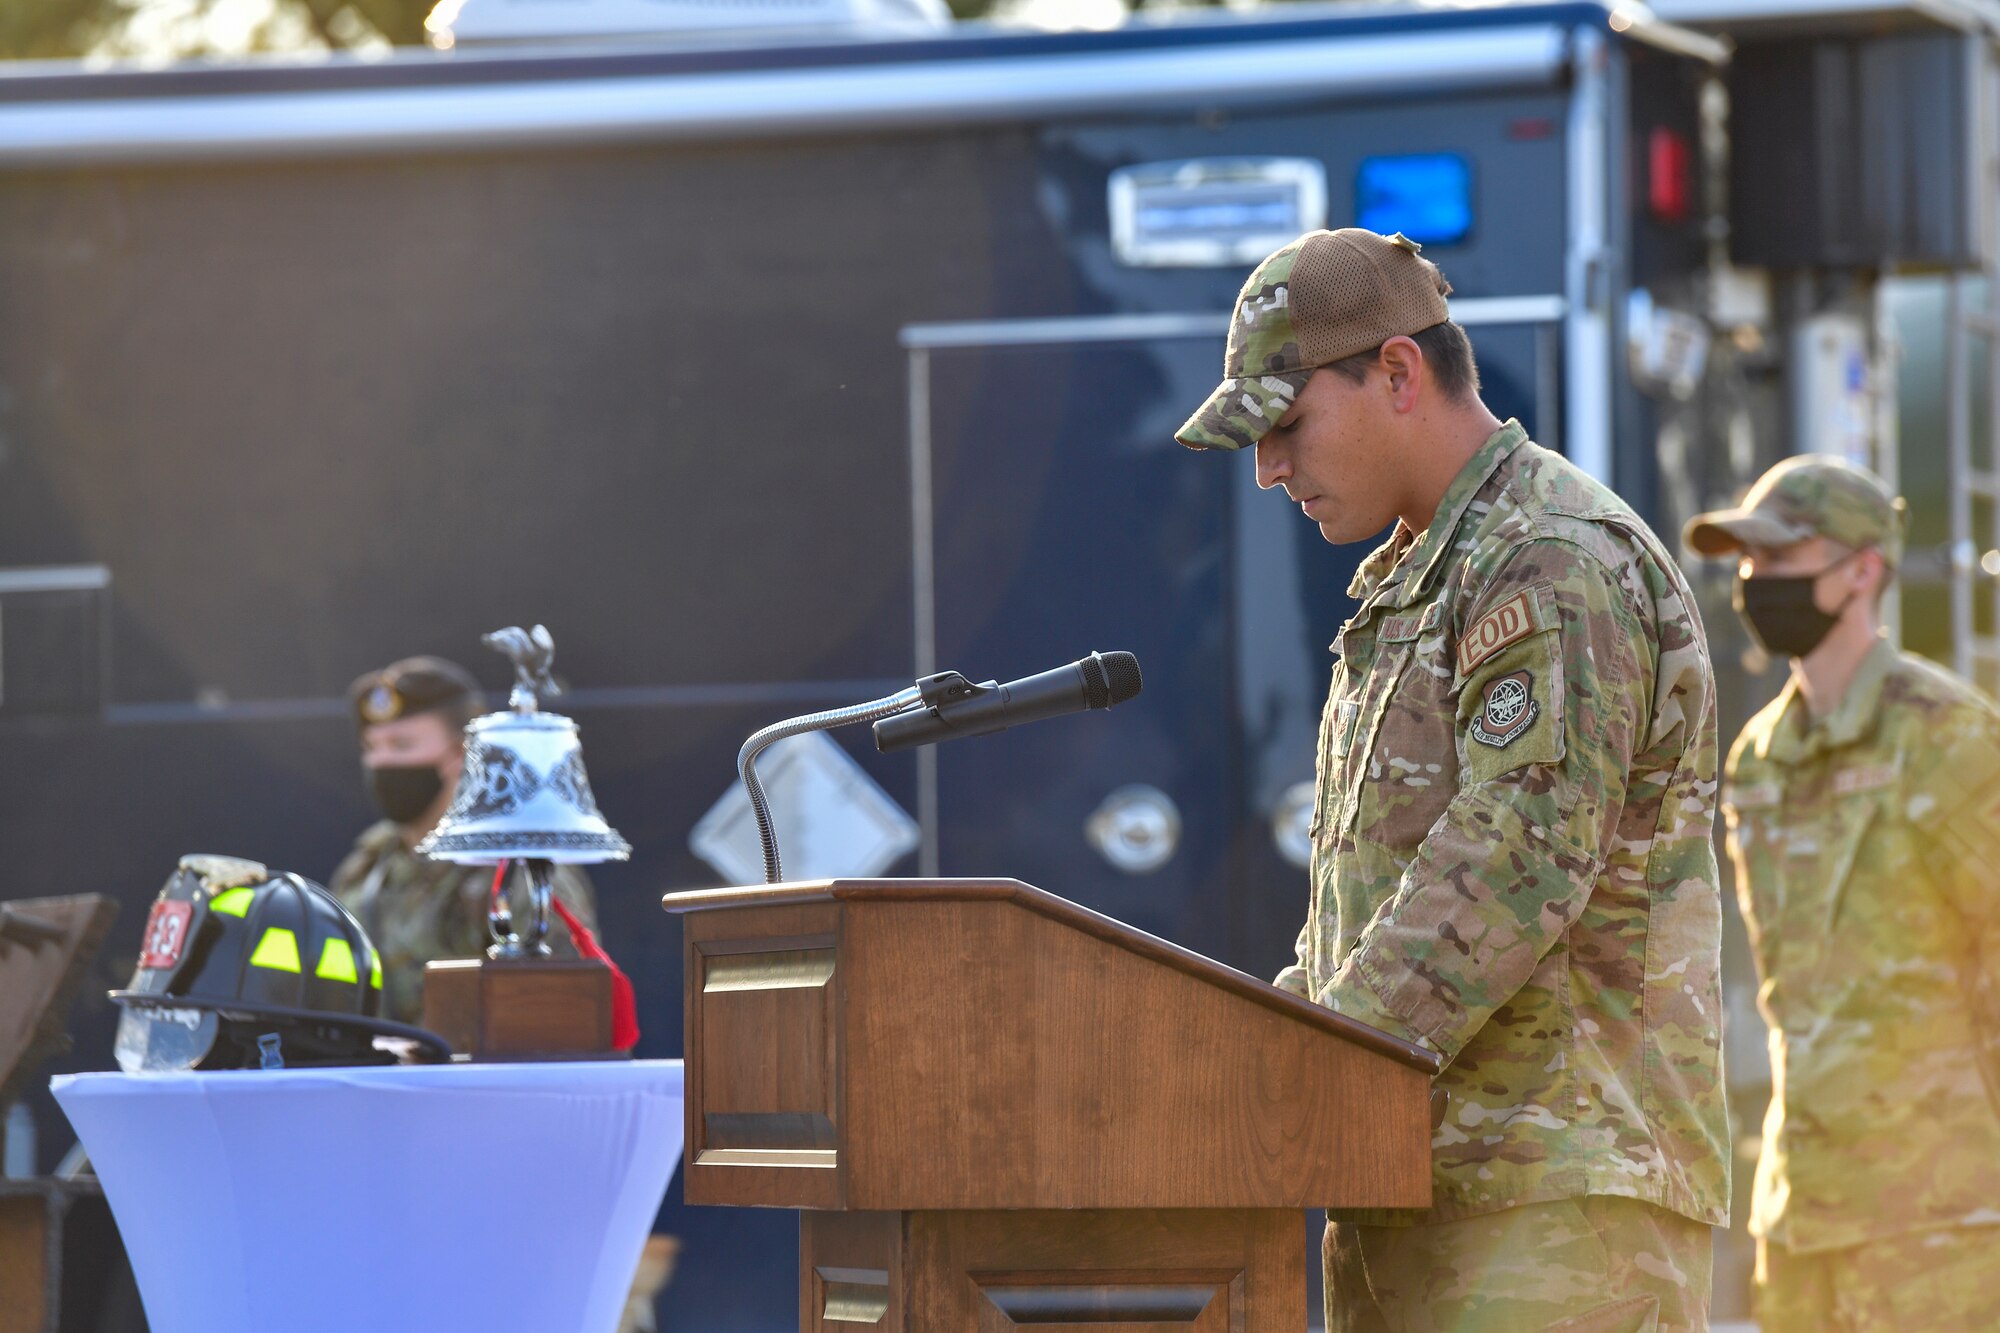 An Airman gives remarks during a ceremony